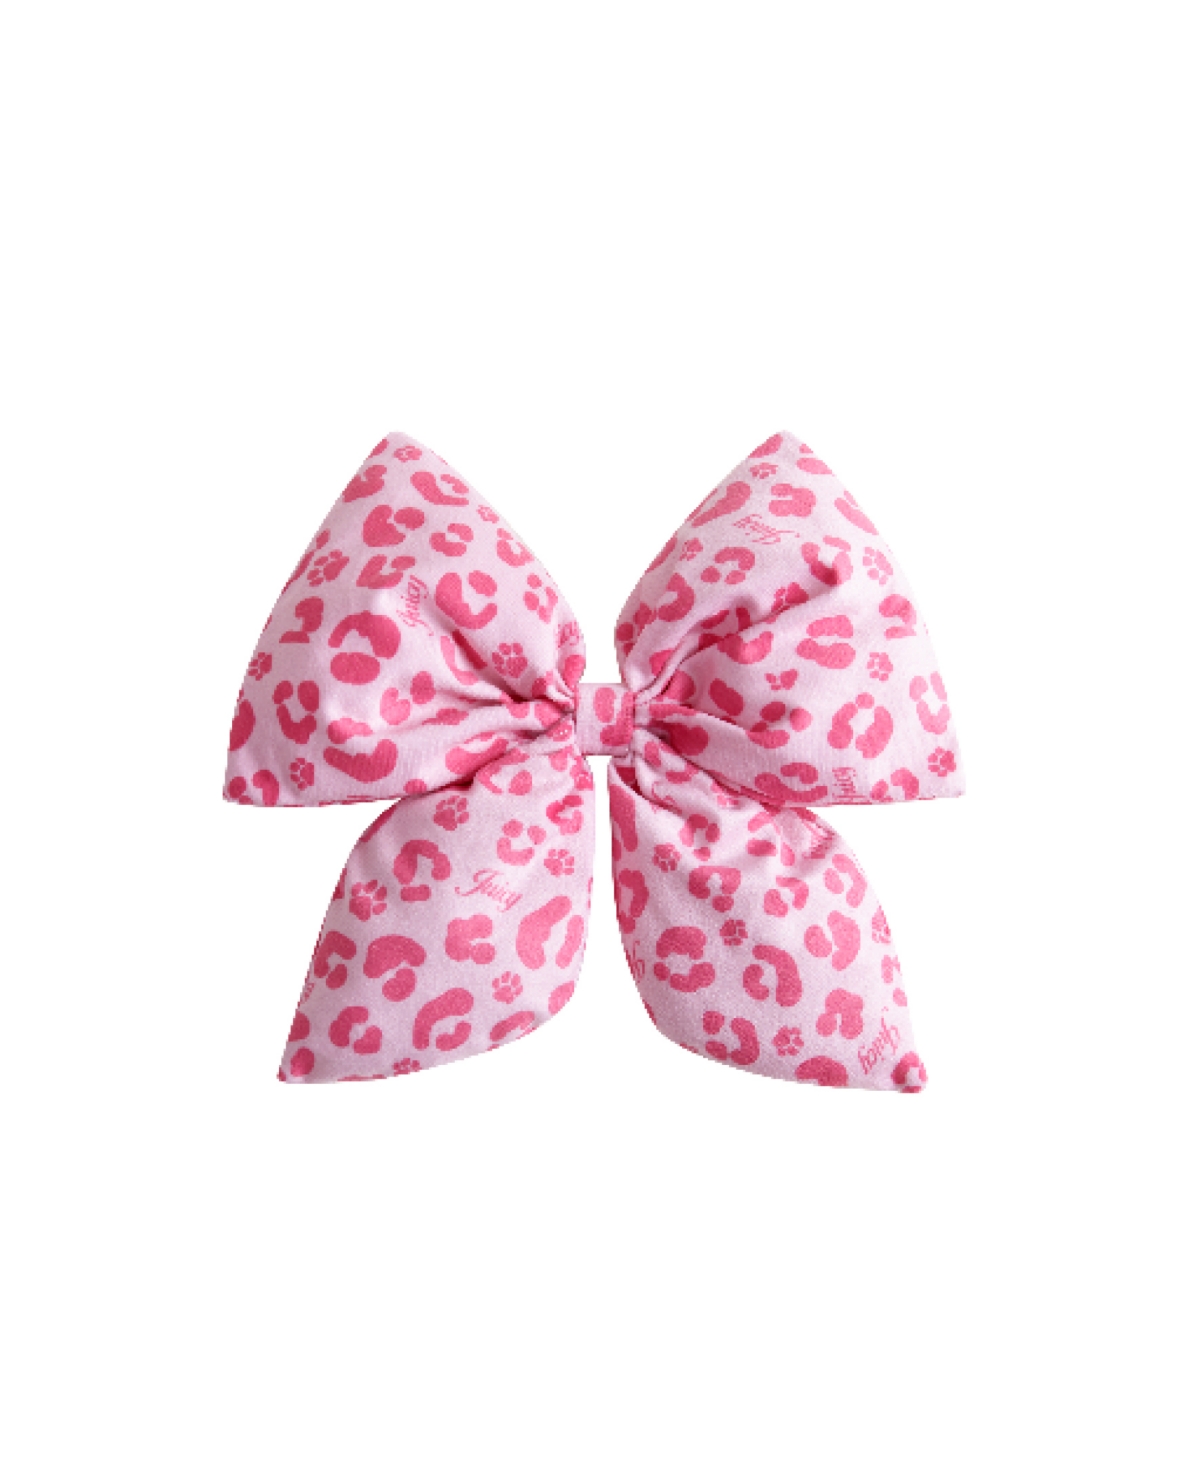 Leopard Bow Squeaky Pet Toy for Small Pets - Pink